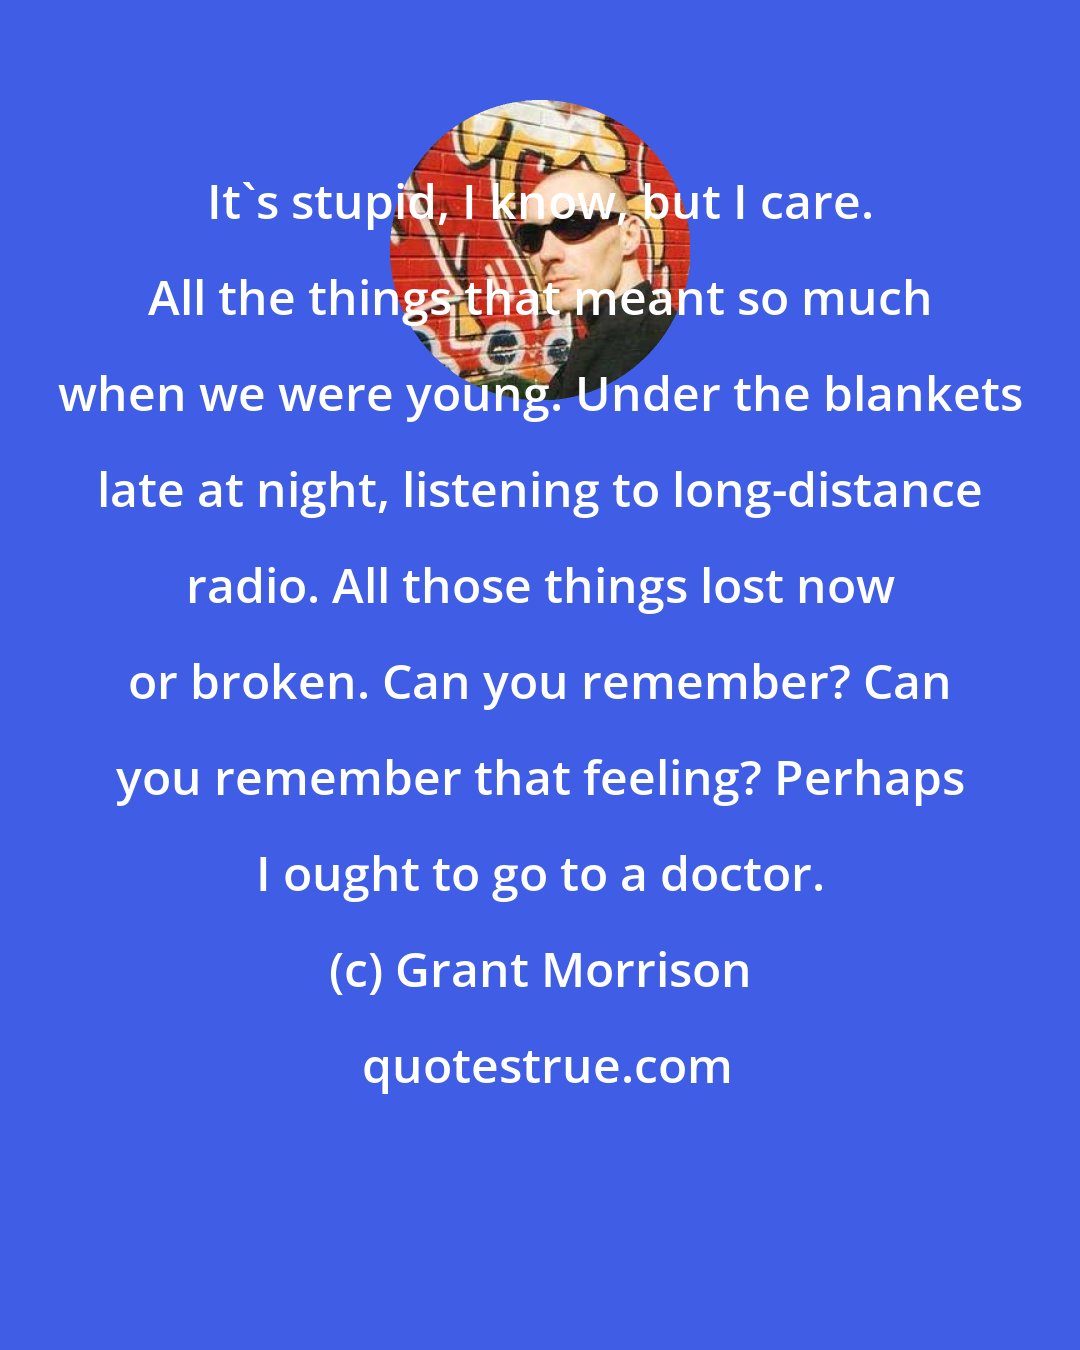 Grant Morrison: It's stupid, I know, but I care. All the things that meant so much when we were young. Under the blankets late at night, listening to long-distance radio. All those things lost now or broken. Can you remember? Can you remember that feeling? Perhaps I ought to go to a doctor.